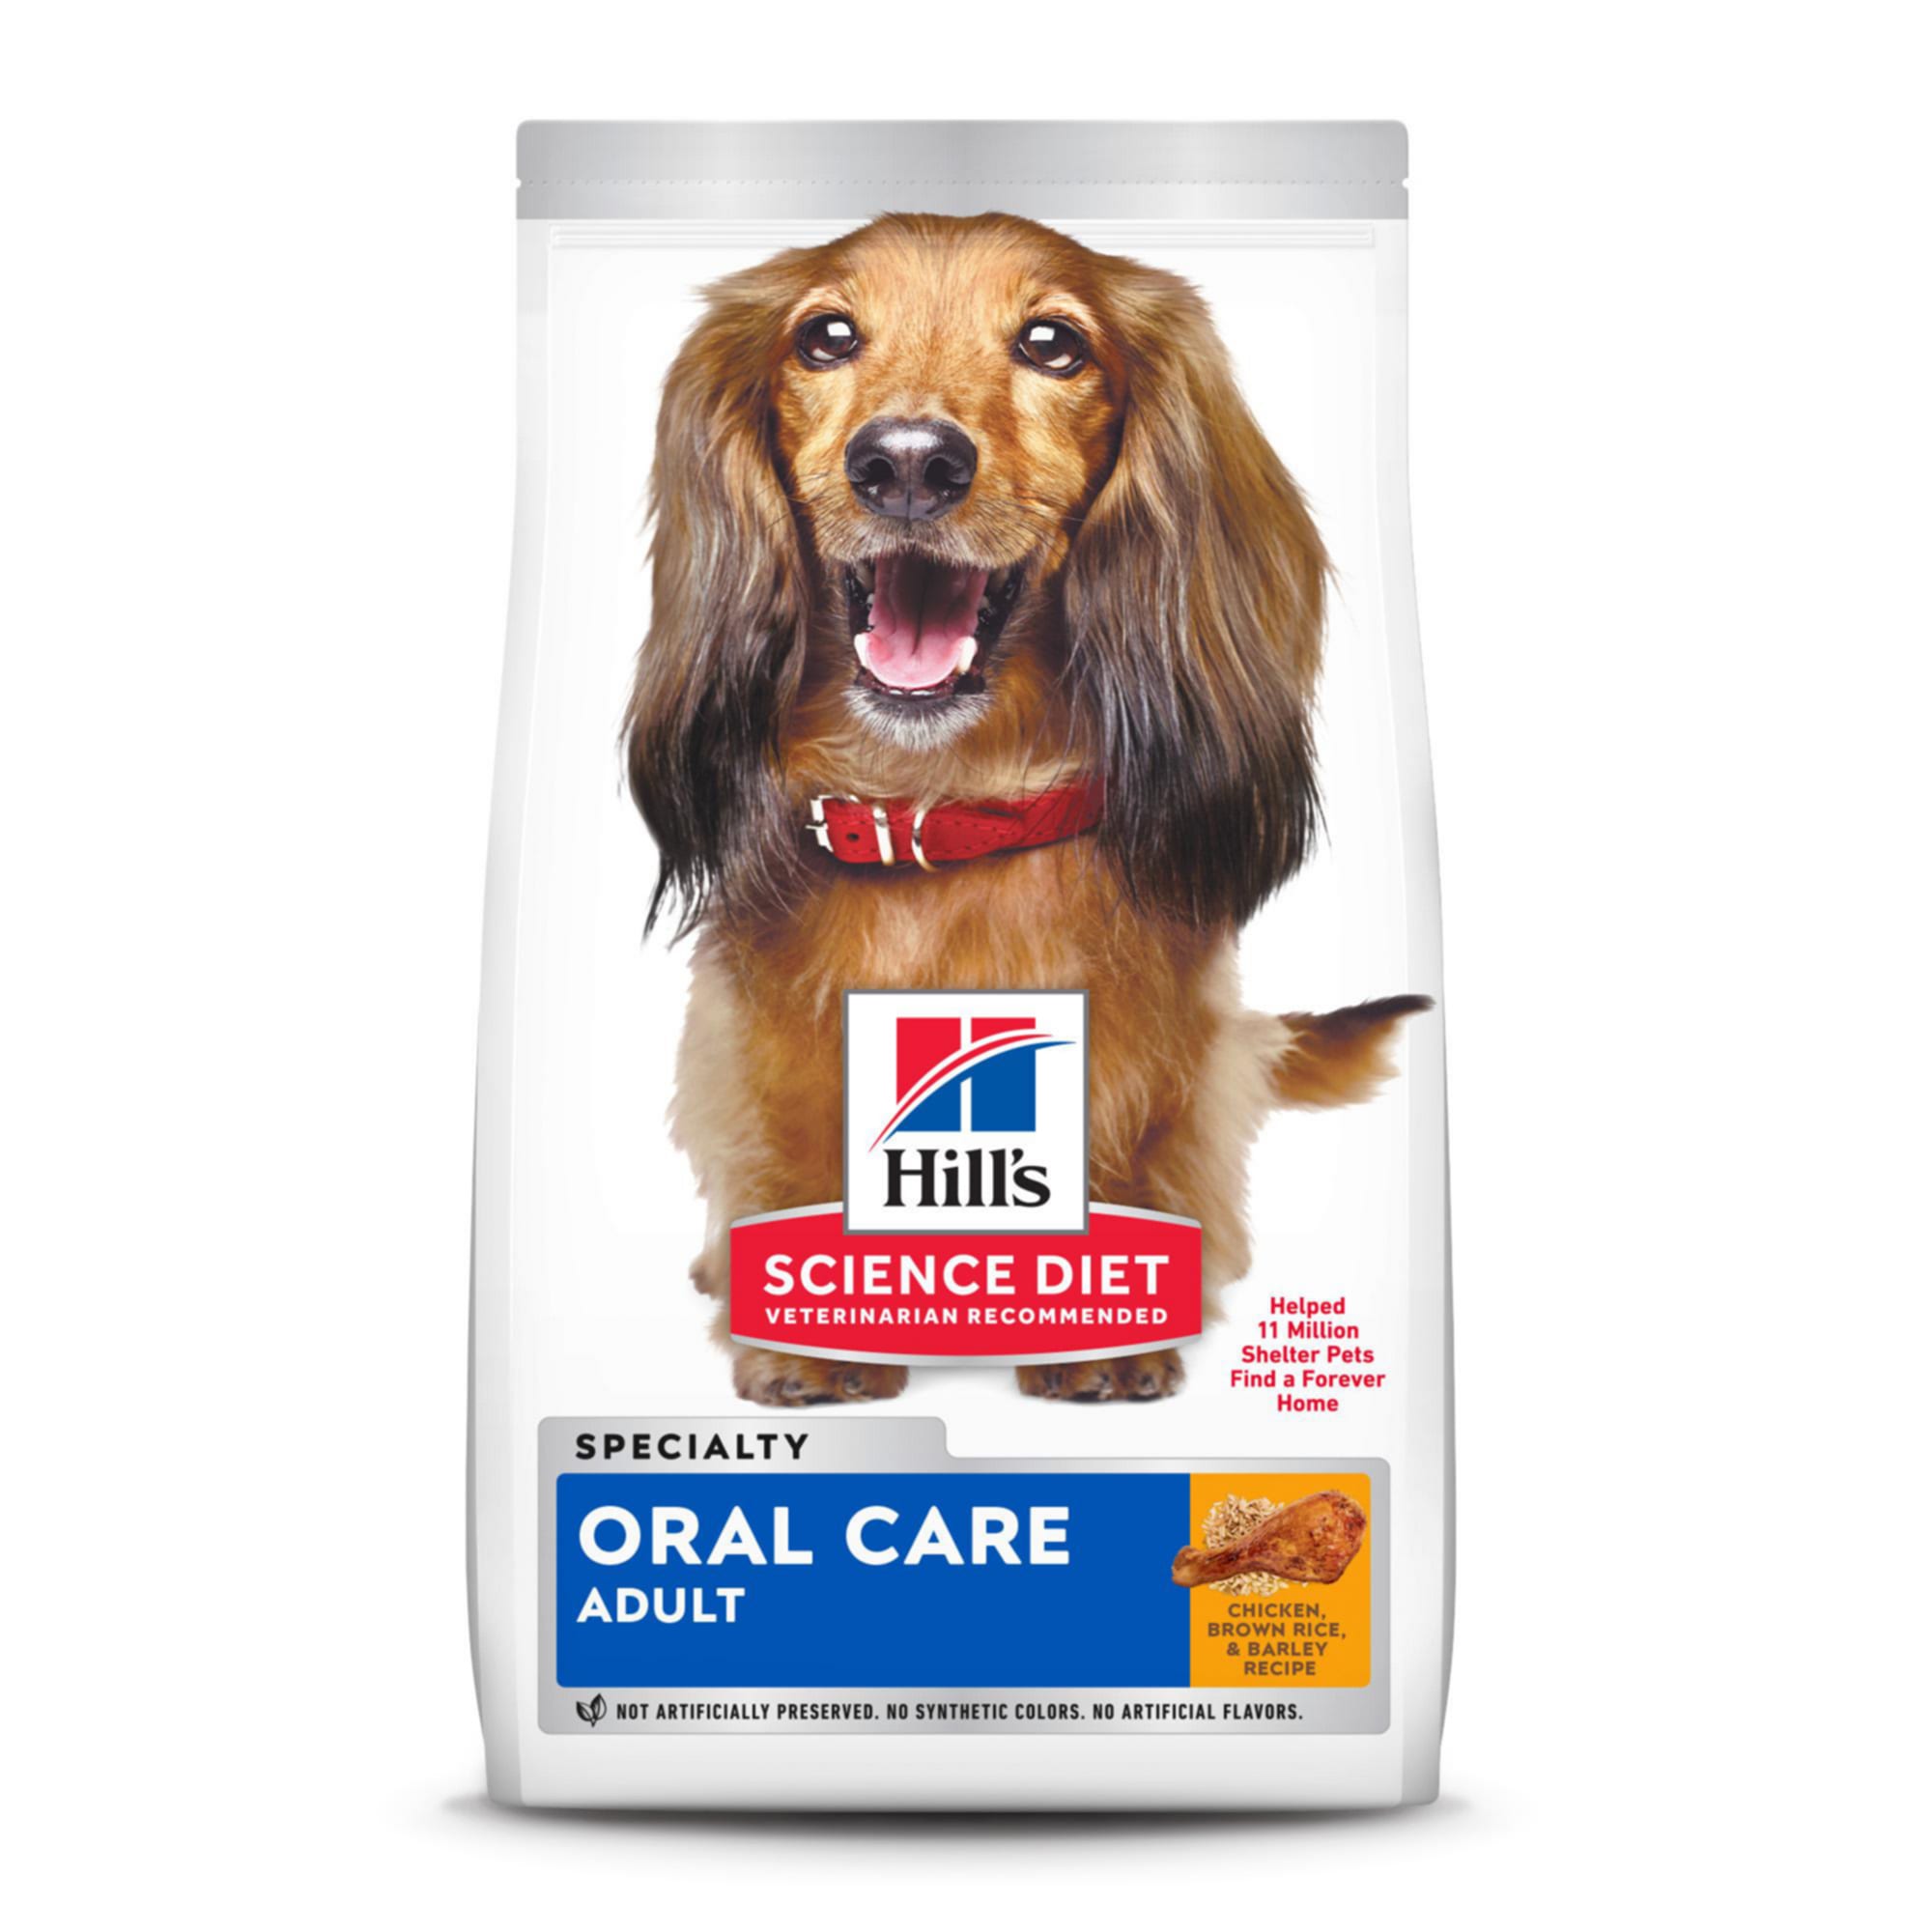 Photos - Dog Food Hills Hill's Hill's Science Diet Adult Oral Care Chicken, Rice & Barley Recipe D 